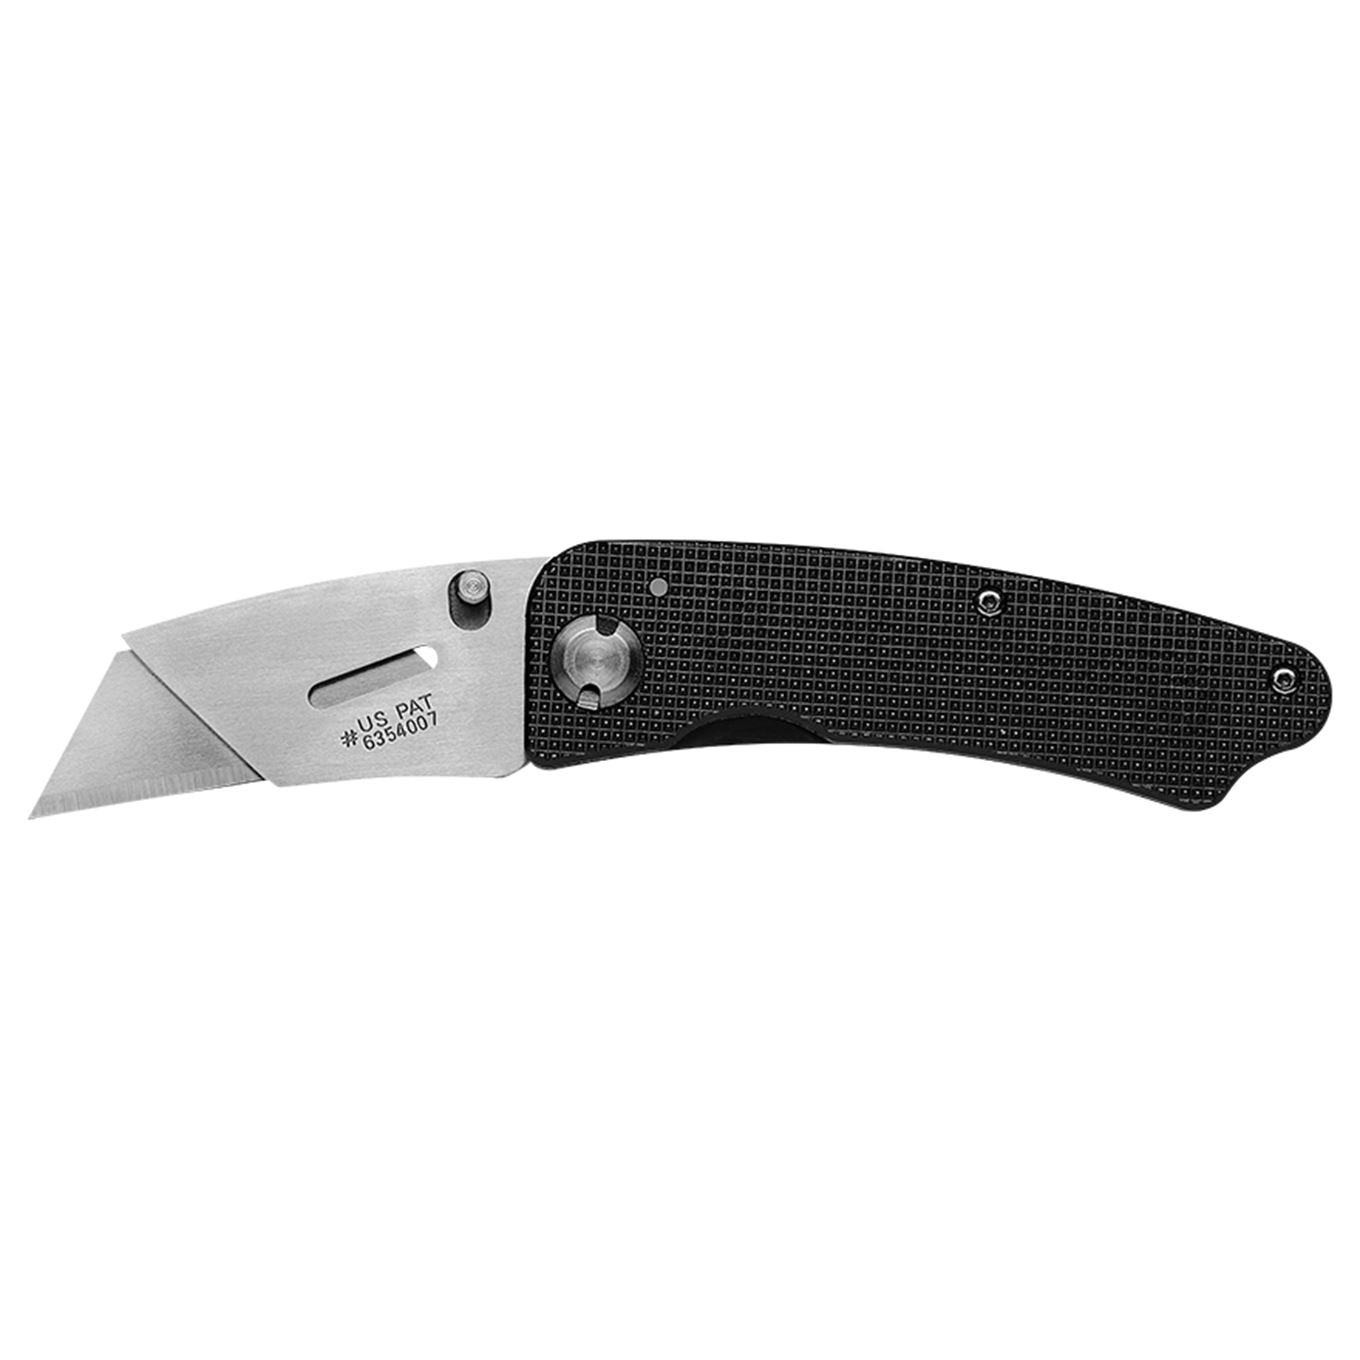 Starrett Hidden Edge Utility Knife with Easy to Use Safety Lock and Level  for Fast, Tool-Free Blade Changes - Retractable Lever Action, Aluminum Case